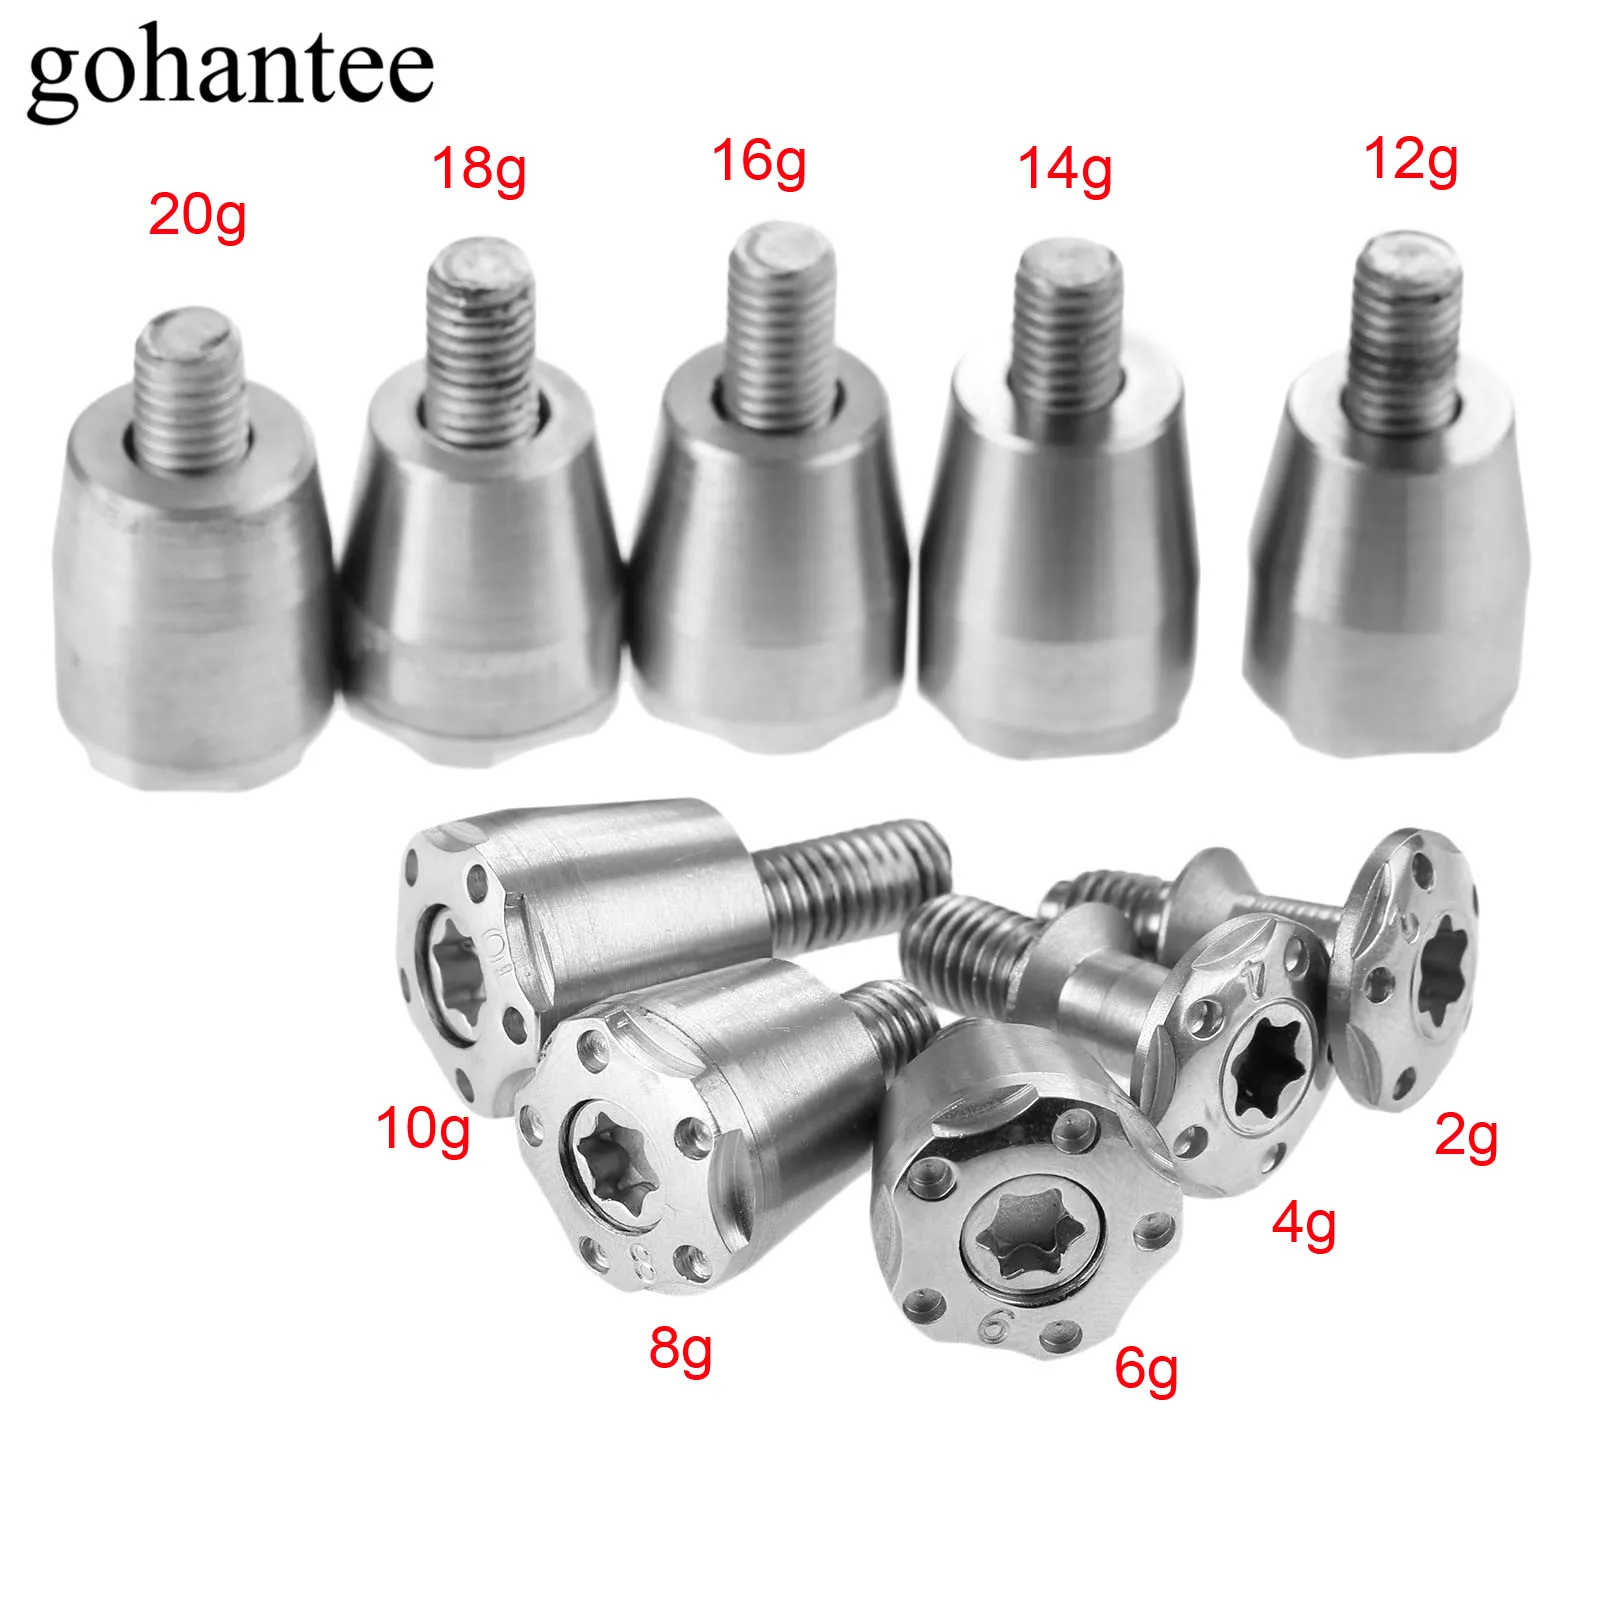 Sporting Golf Weight Screw 1g 2g 4g 5g 6g 8g 10g 12g 14g 16g 18g 20g for R9 R11  - $29.90